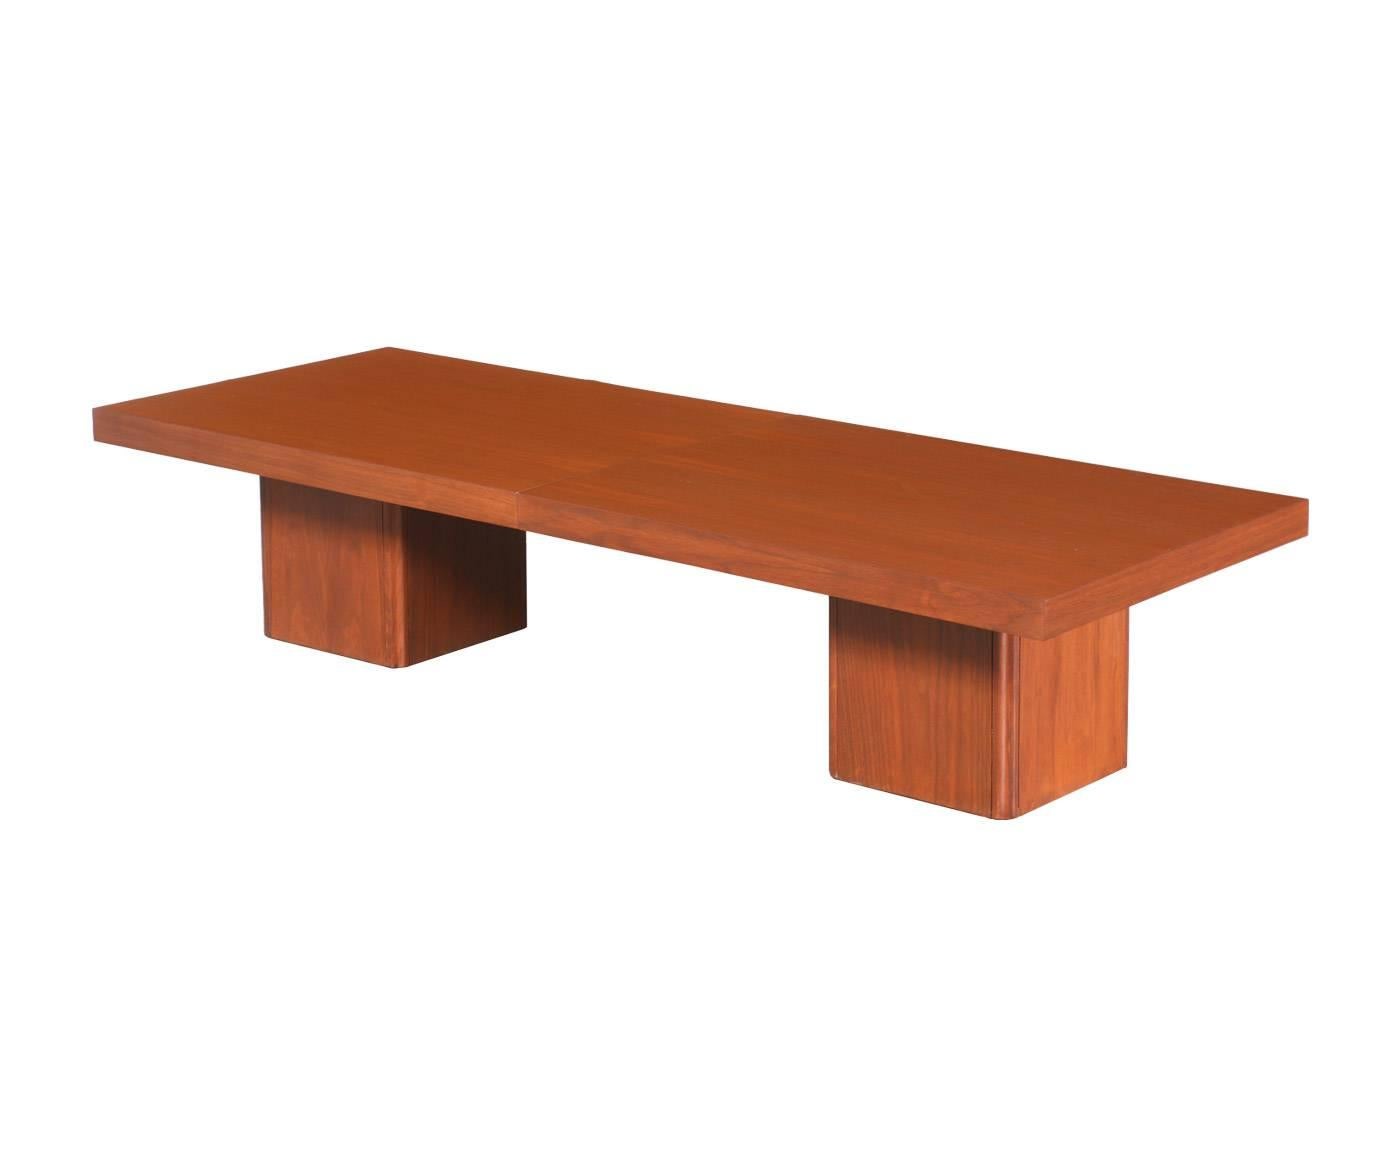 Designer: John Keal.
Manufacturer: Brown & Saltman.
Period/Style: Mid-Century Modern.
Country: United States.
Date: 1960s.

Dimensions: 14″ H x 66″ L x 24″ W.
Expands up to 96″.
Materials: Walnut, black laminate.
Condition: Excellent, newly